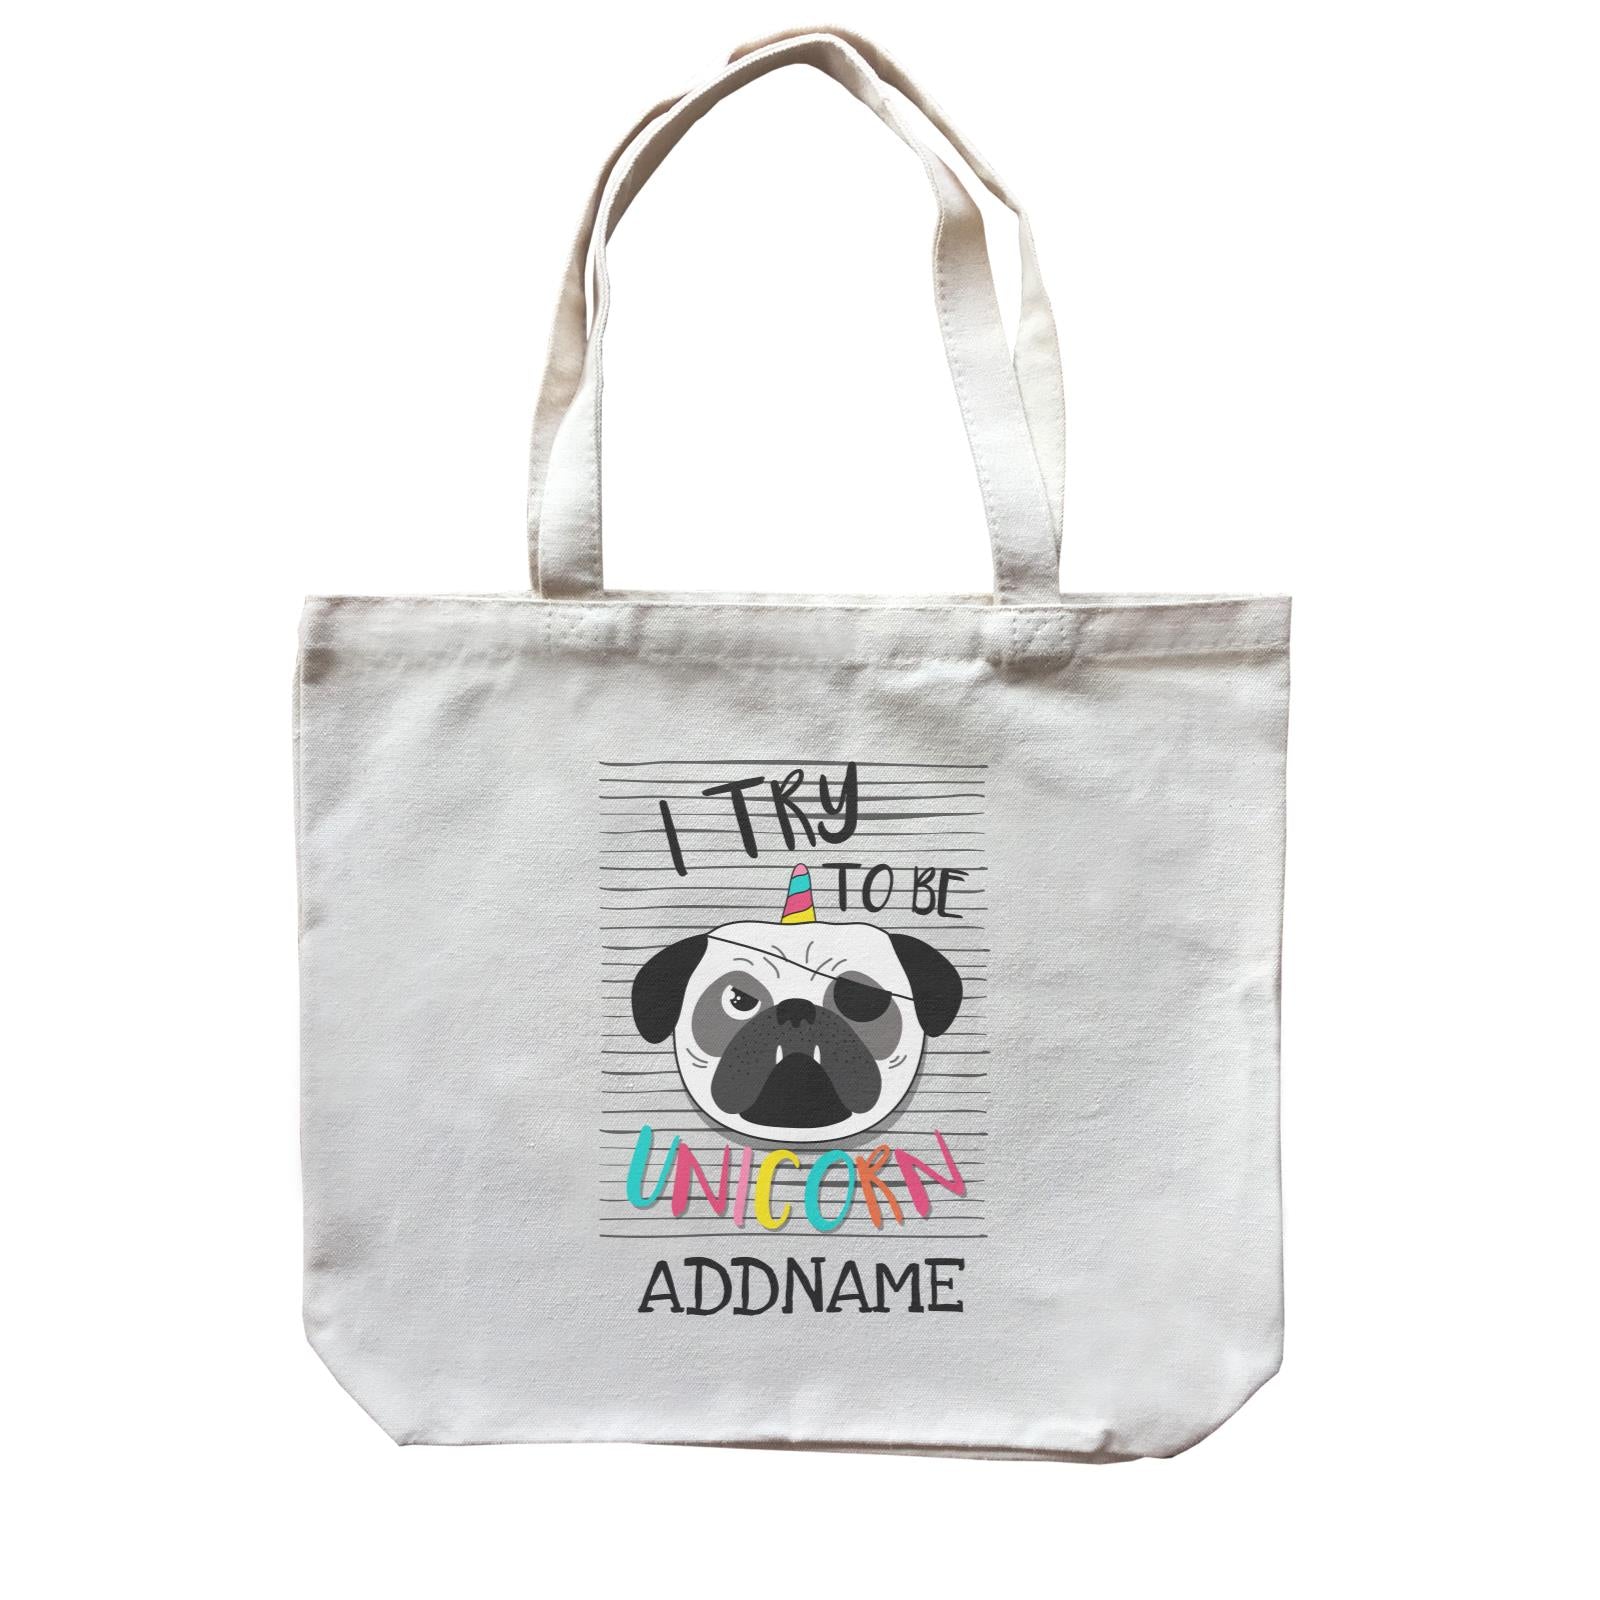 I Try to Be Unicorn Pug Addname Canvas Bag